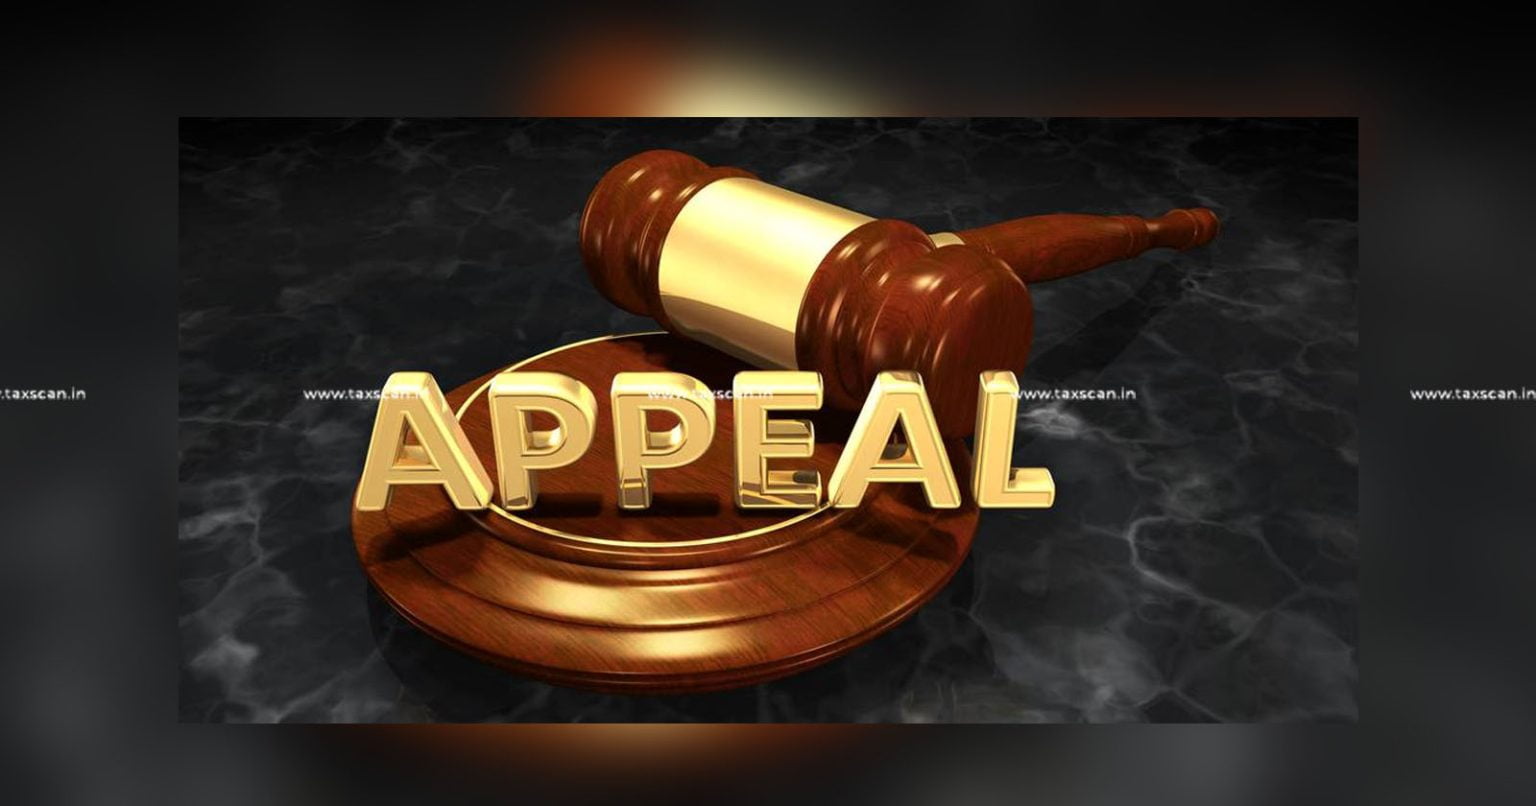 Appeal - Substantial Question - Appeal shall not be allowed when there is no Substantial Question - taxscan